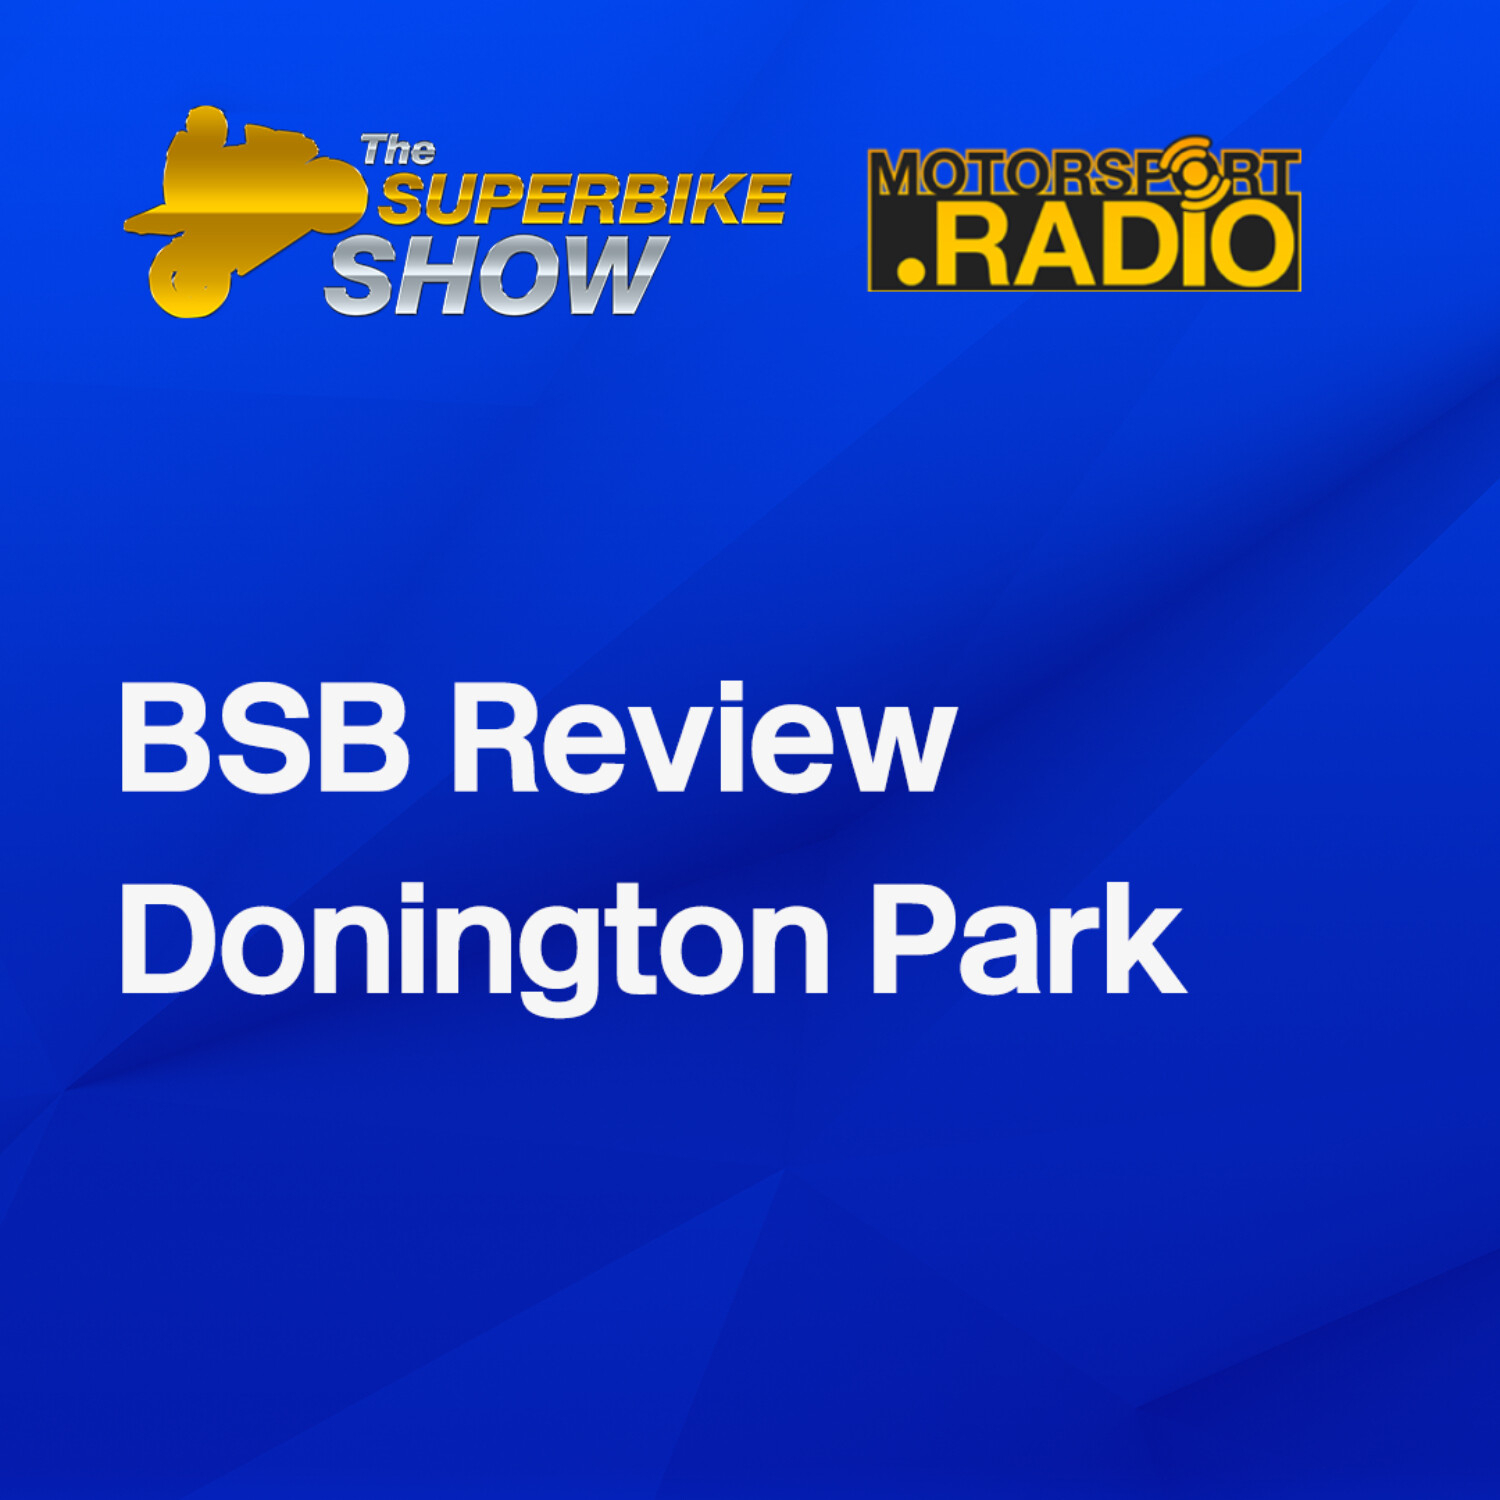 The Superbike Show - BSB Review of Donington